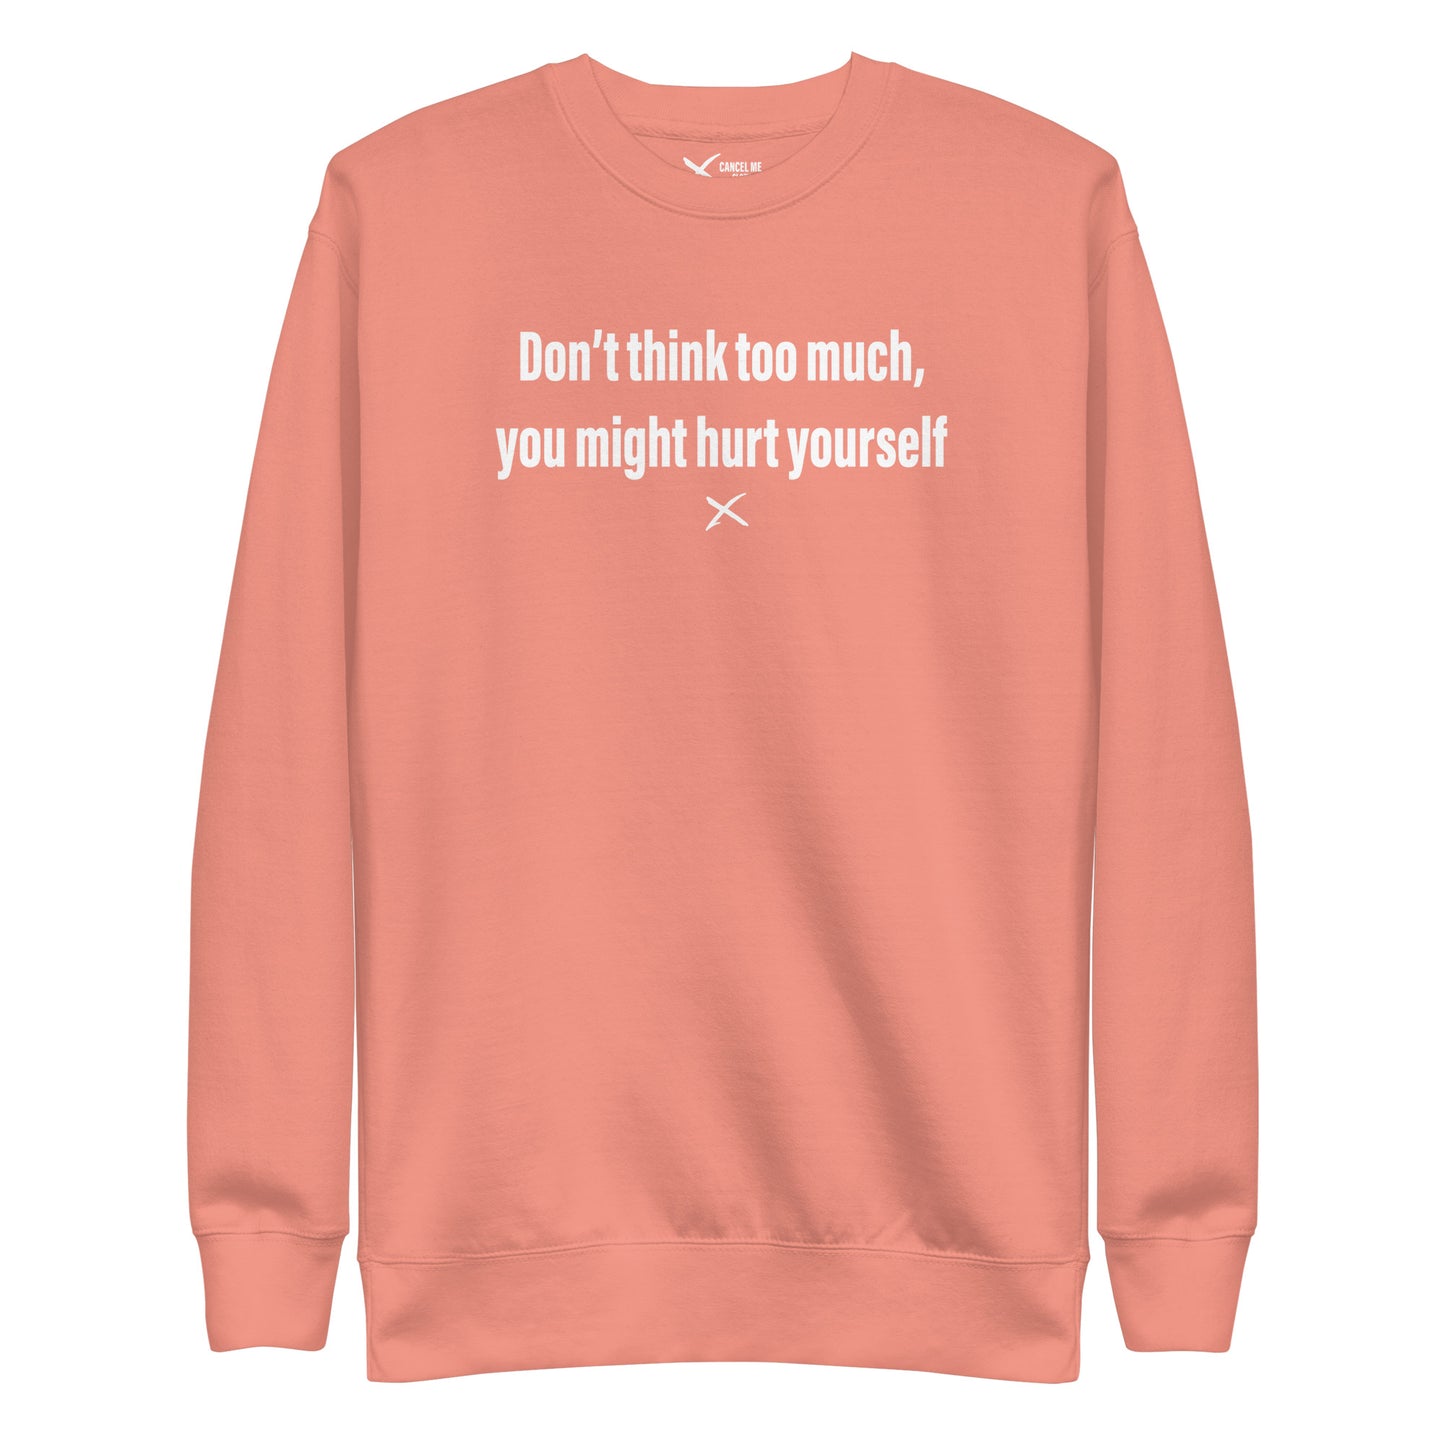 Don't think too much, you might hurt yourself - Sweatshirt